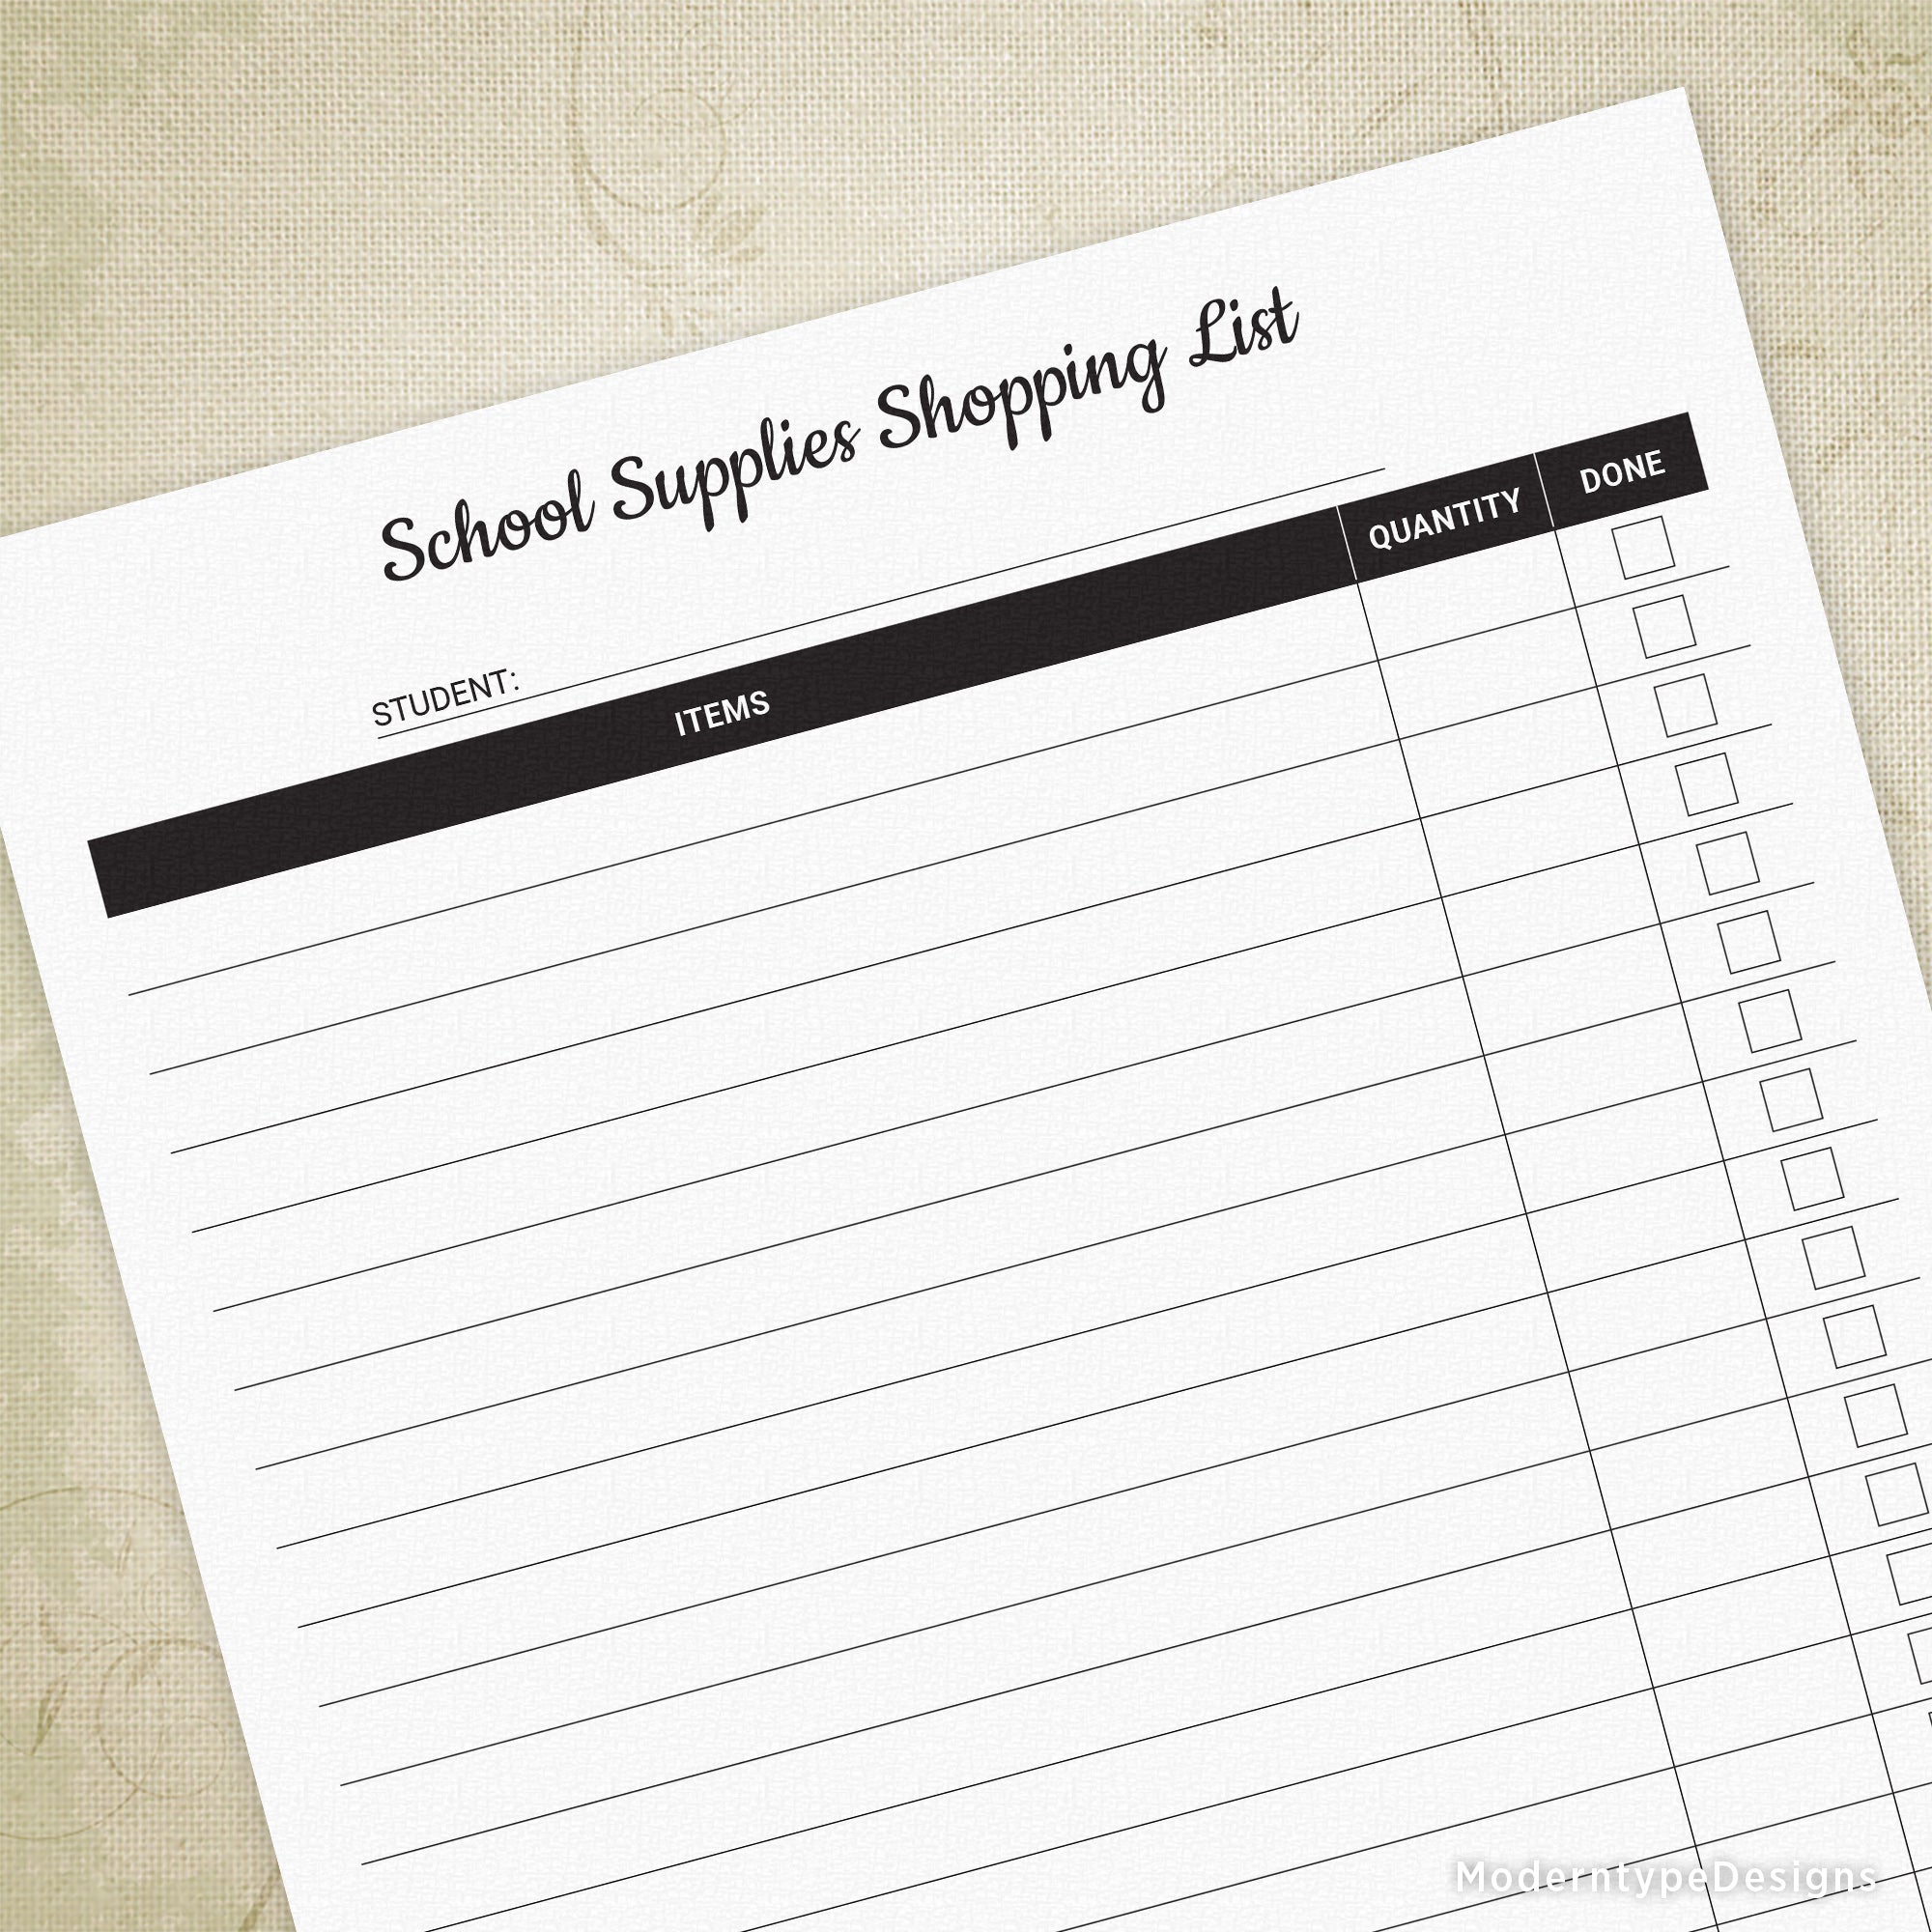 How to Get Cheap & Free School Supplies for College Students